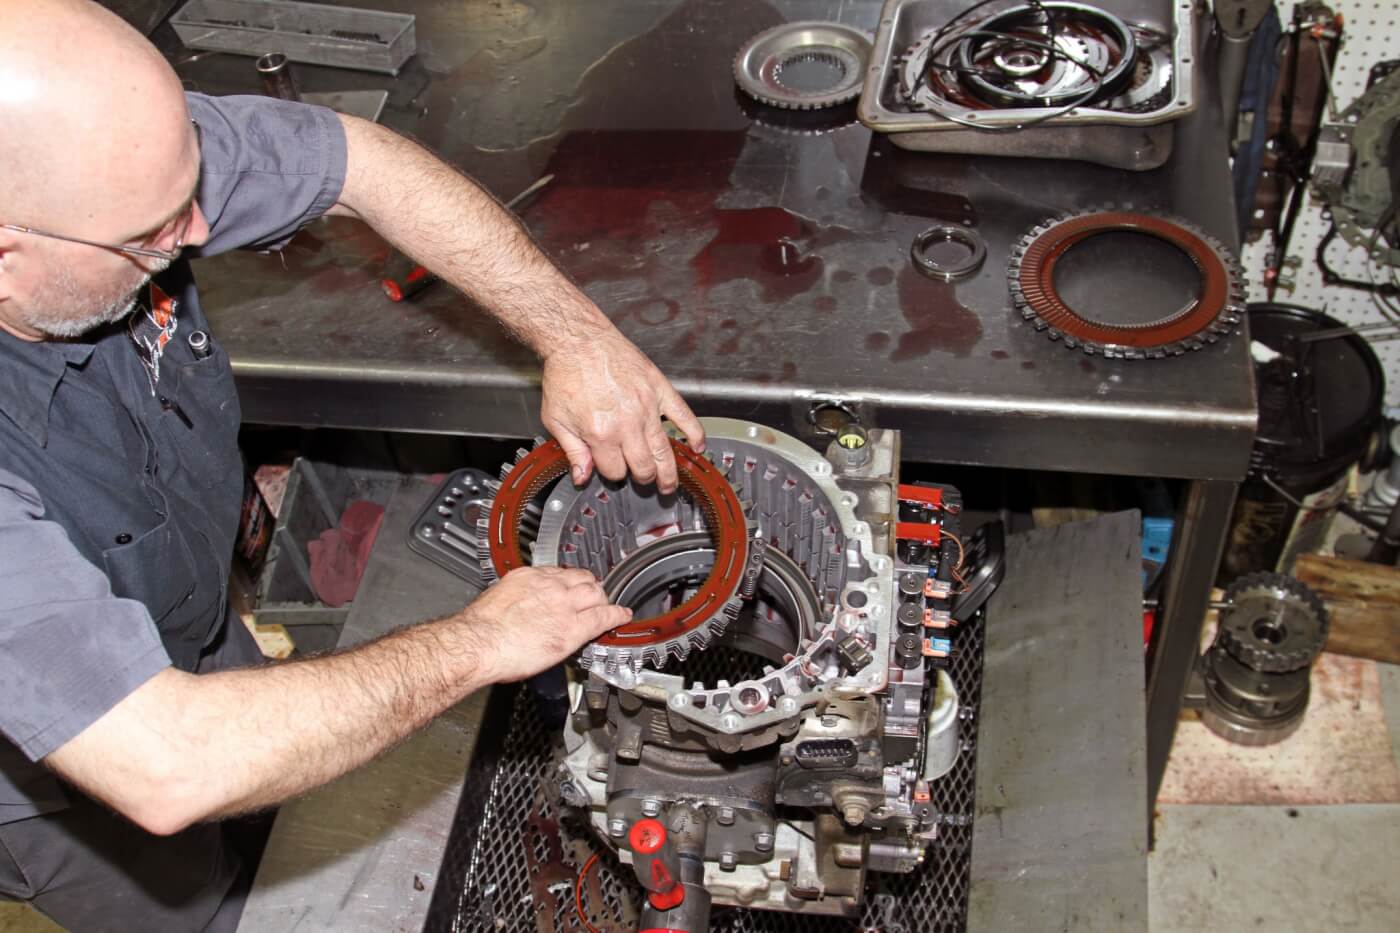 6. Even though this set of clutches did not appear damaged, the Merchant Automotive crew replaces them rather than reusing them so that the MA450 has new clutch material throughout the transmission in every clutch pack.